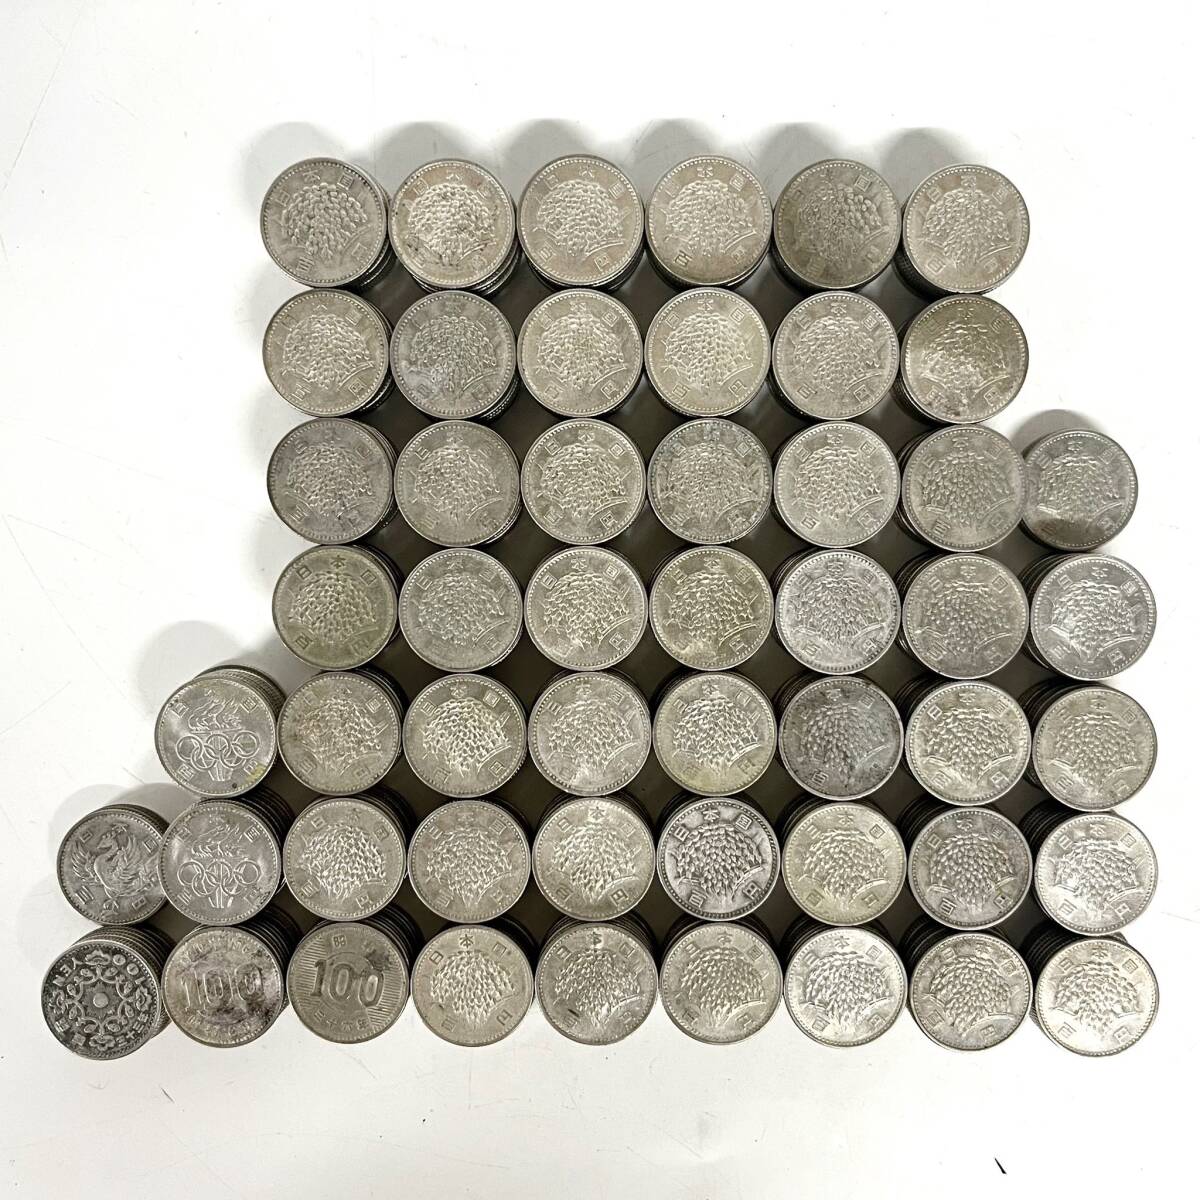 1 jpy ~[ face value 50700 jpy ] Tokyo Olympic .. phoenix 100 jpy silver coin set sale gross weight approximately 2422g all 507 point commemorative coin memory money through .G116602